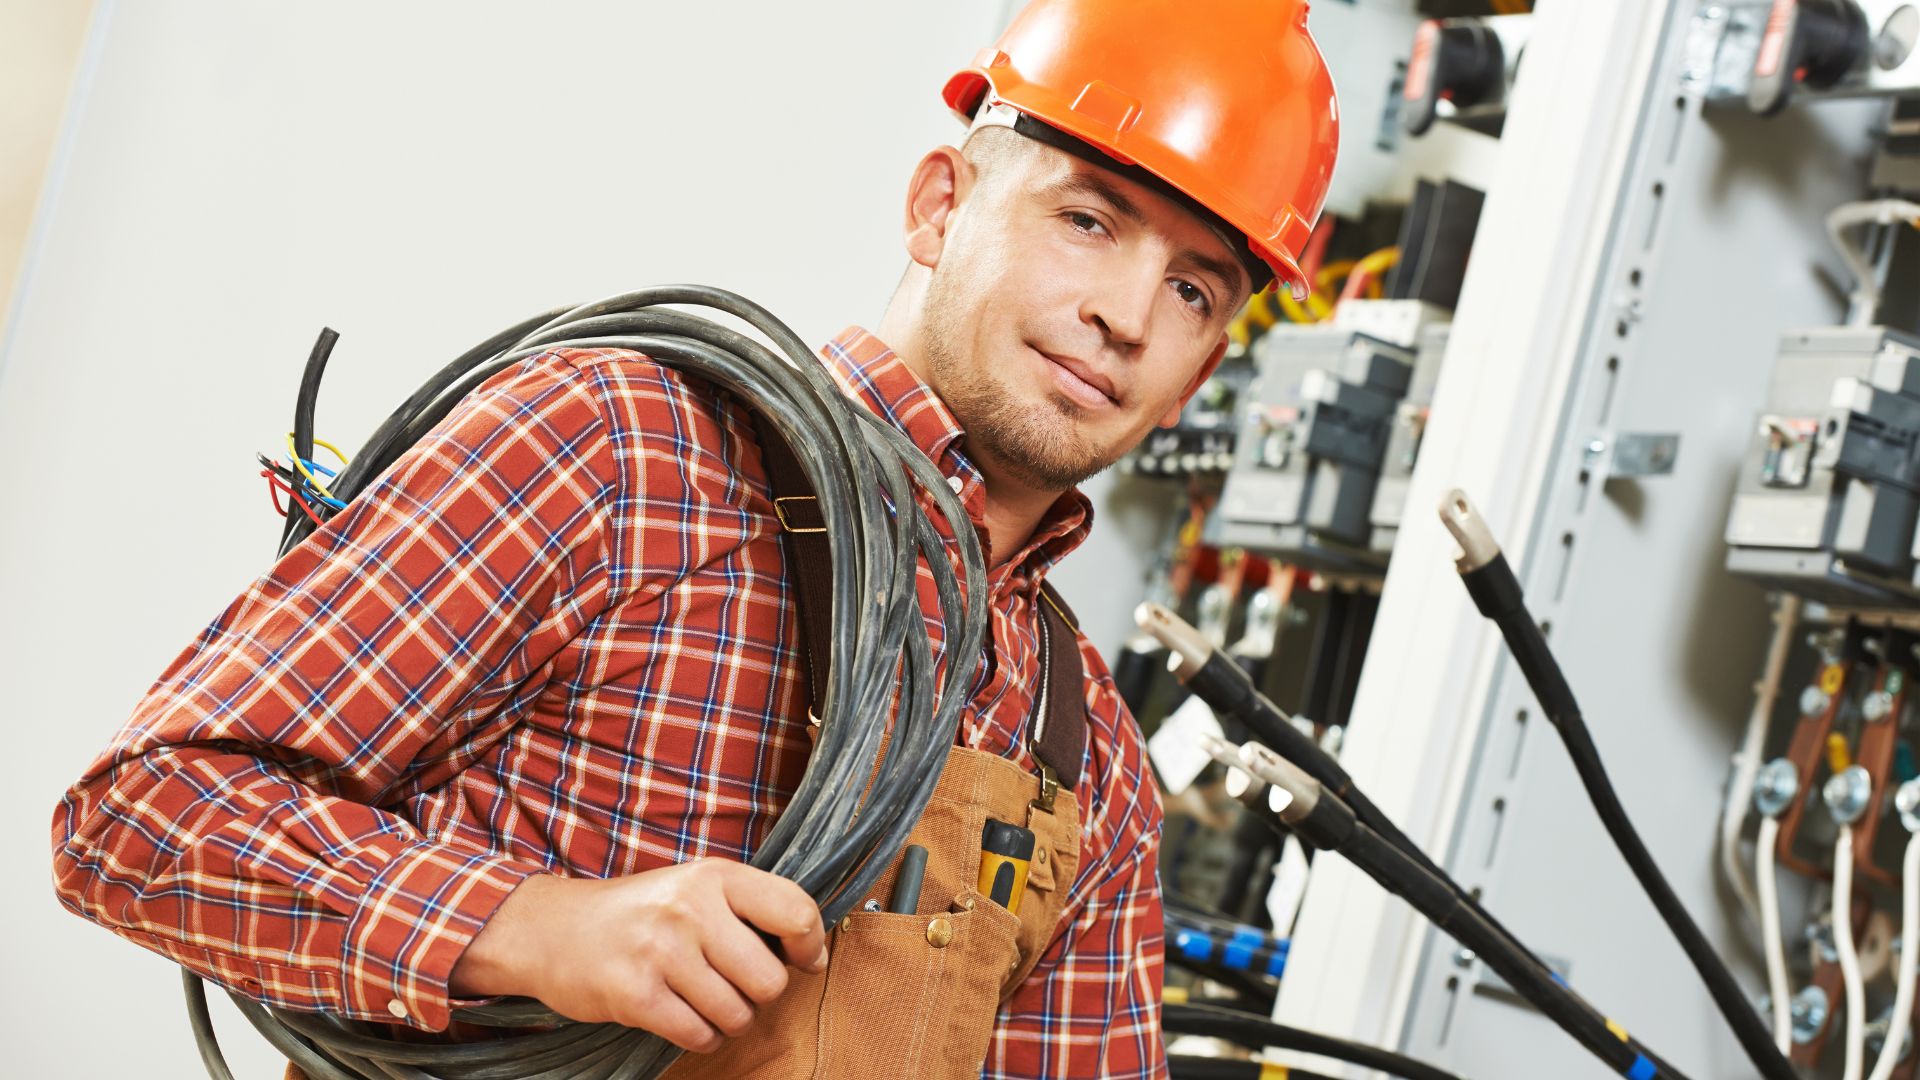 Advantages of Hiring Professional Electricians: Comprehensive Electrical Services